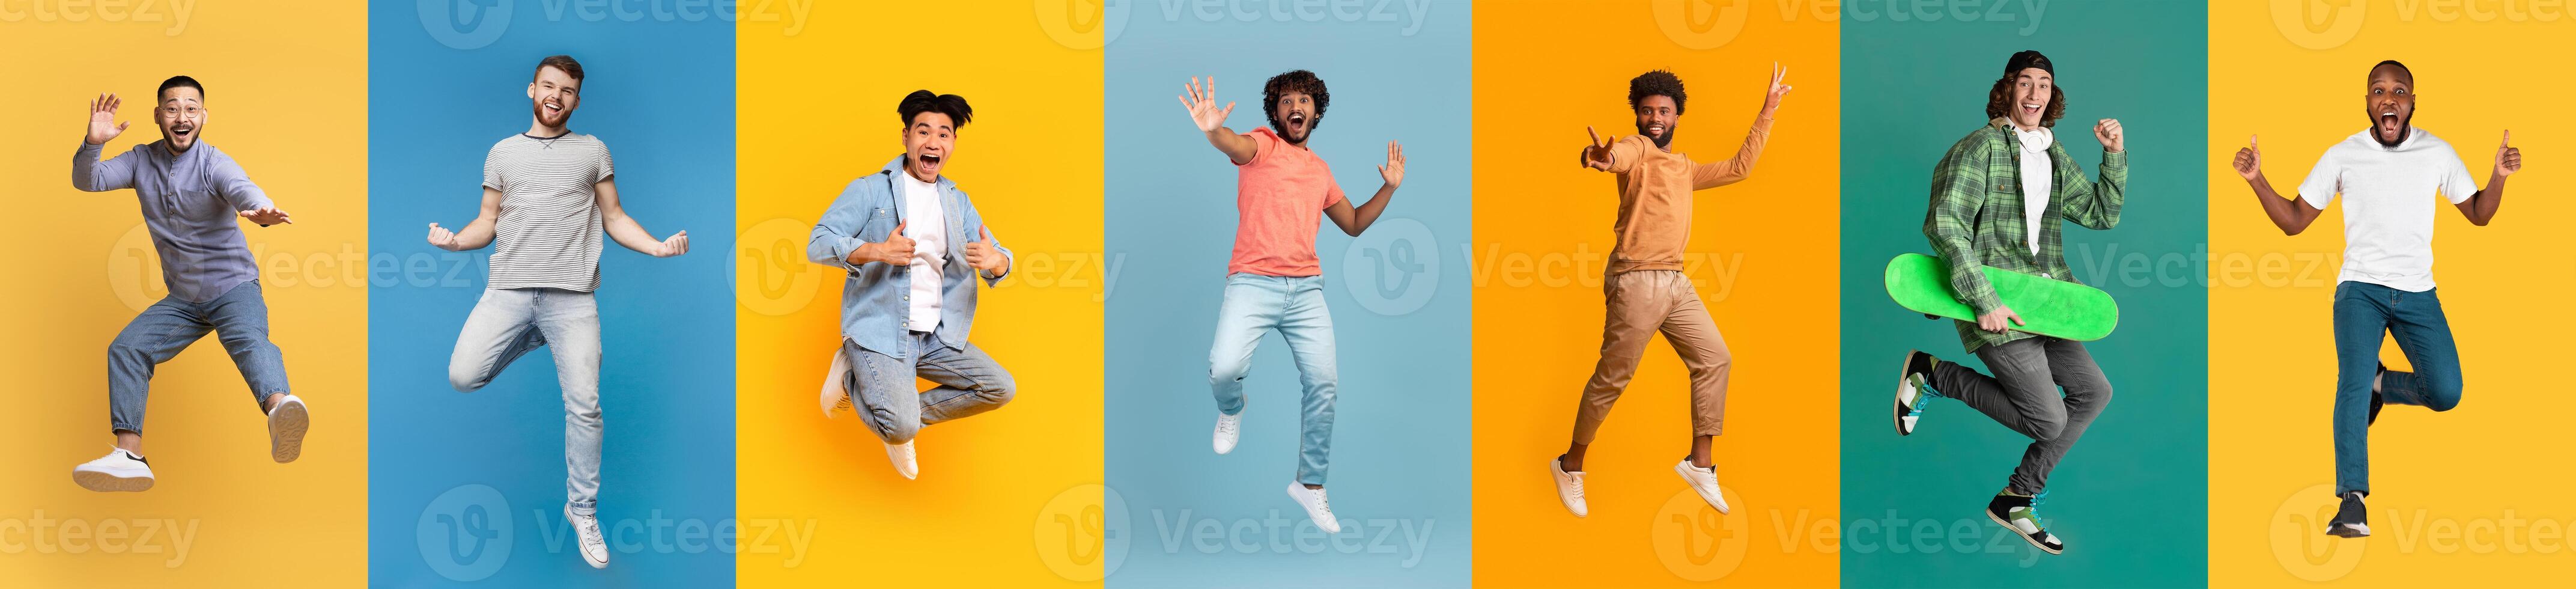 Collection of positive multiracial young men jumping on colorful studio backgrounds photo